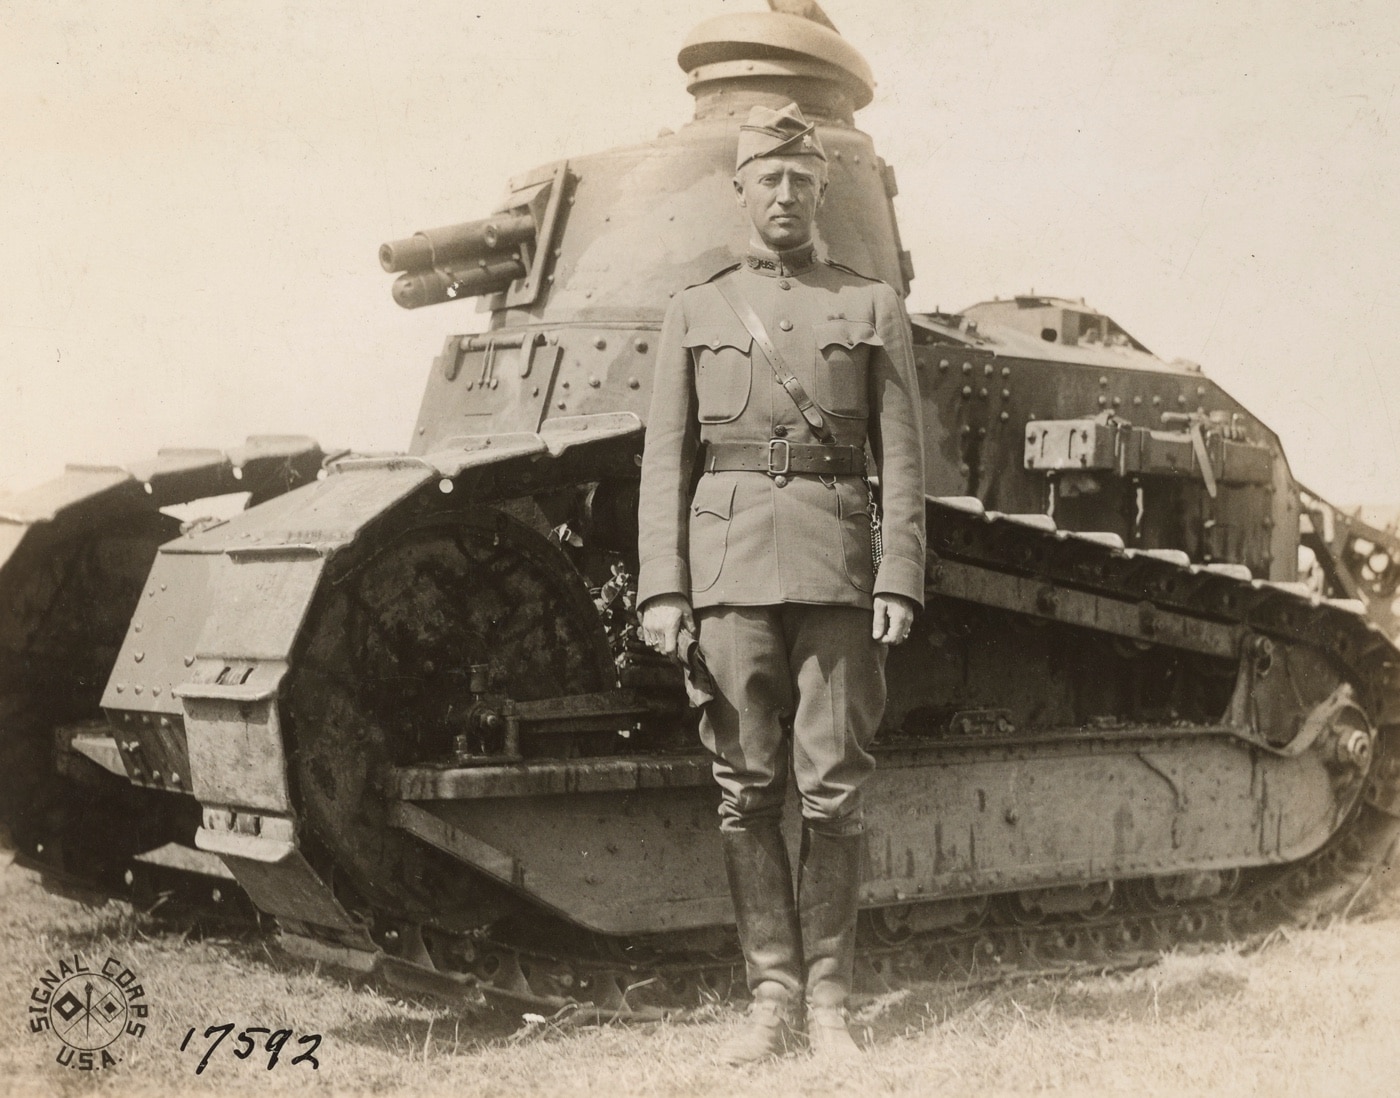 In this image from World War I, Gen Patton stands with a Renault tank, the first combat tank employed by U.S. troops.